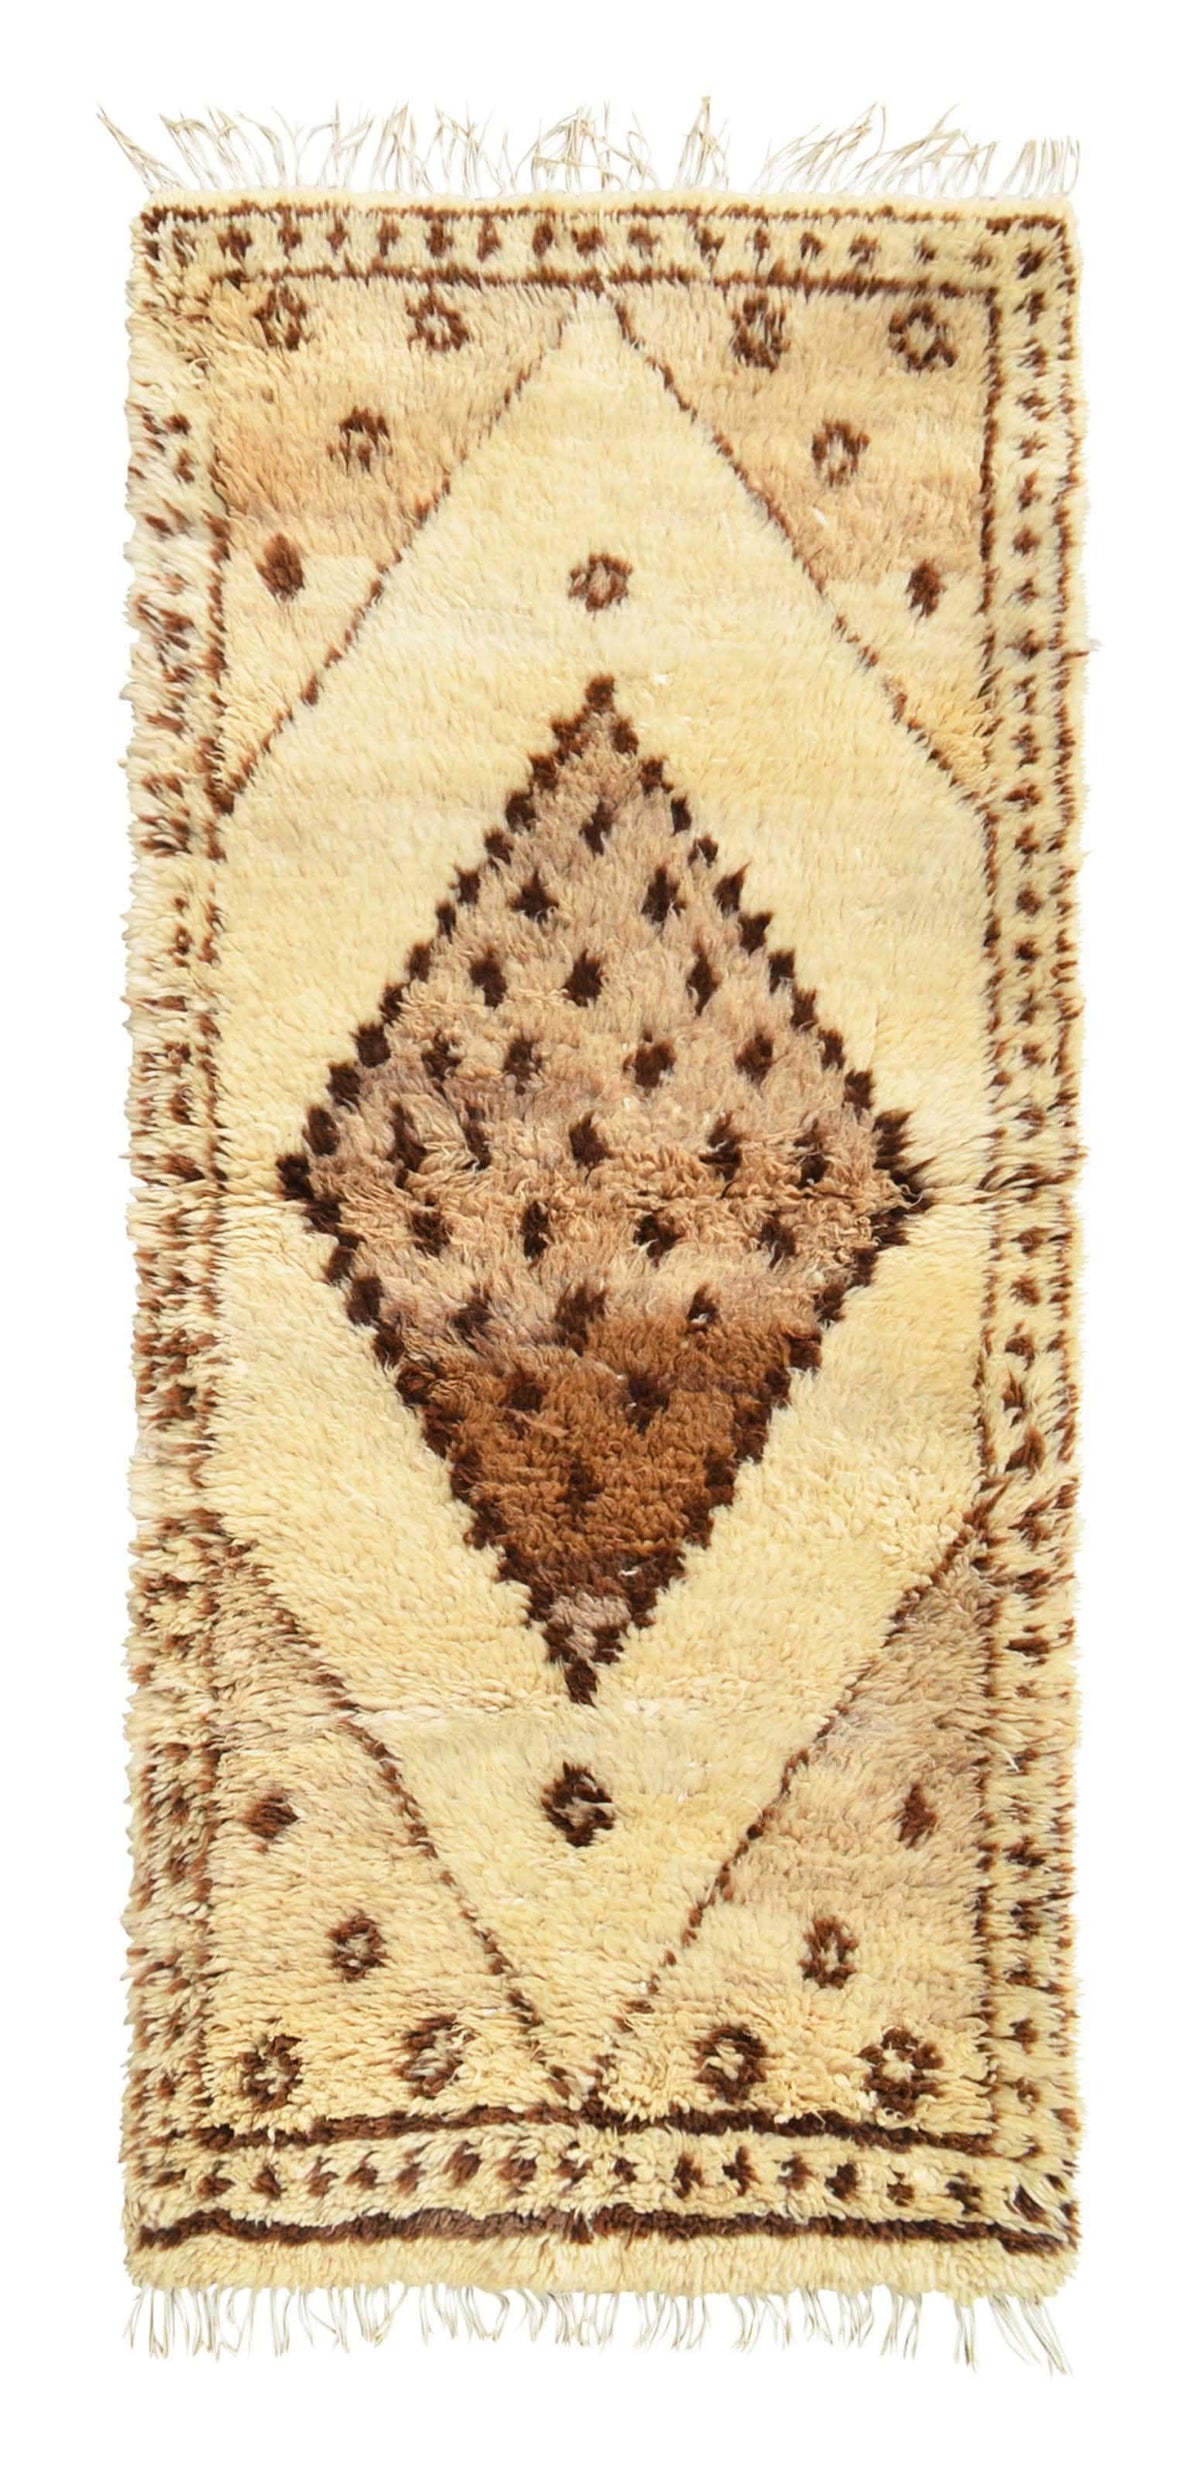 Vintage Moroccan Rug Vintage Art Deco Rugs - White And Brown Rugs - Illuminate Collective illuminate collective